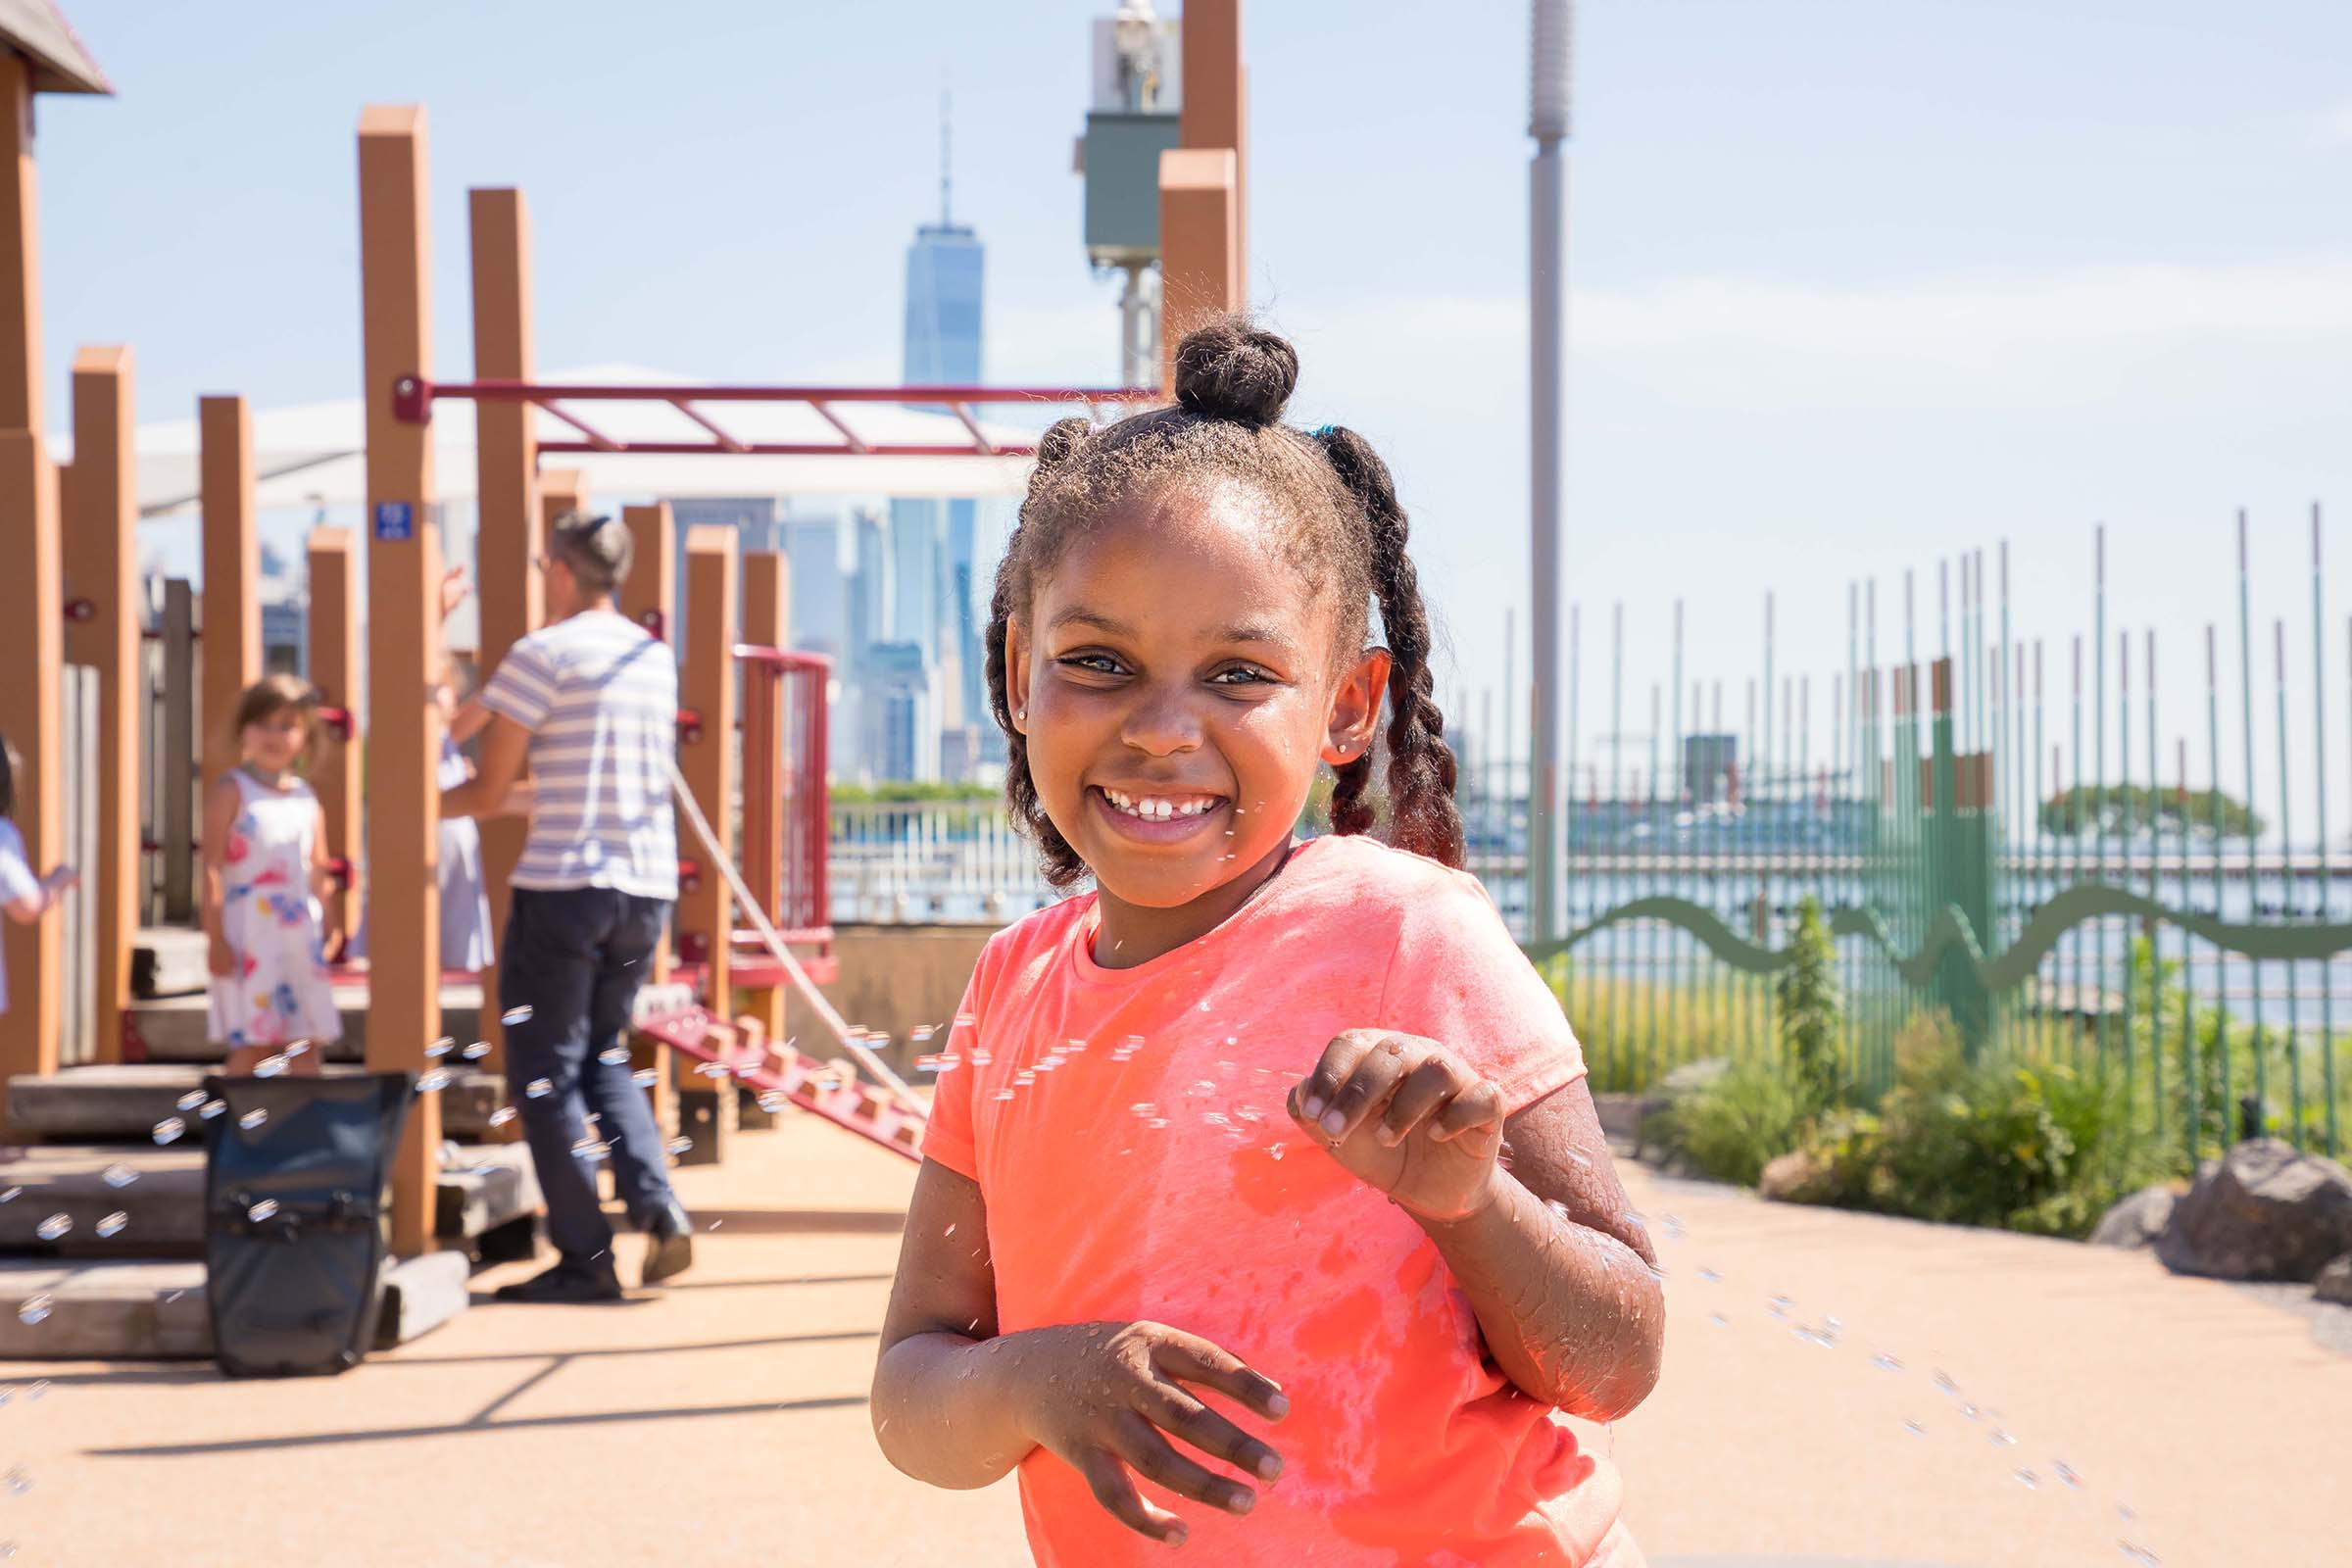 A young girl enjoying bubbles at Pier 51's playground